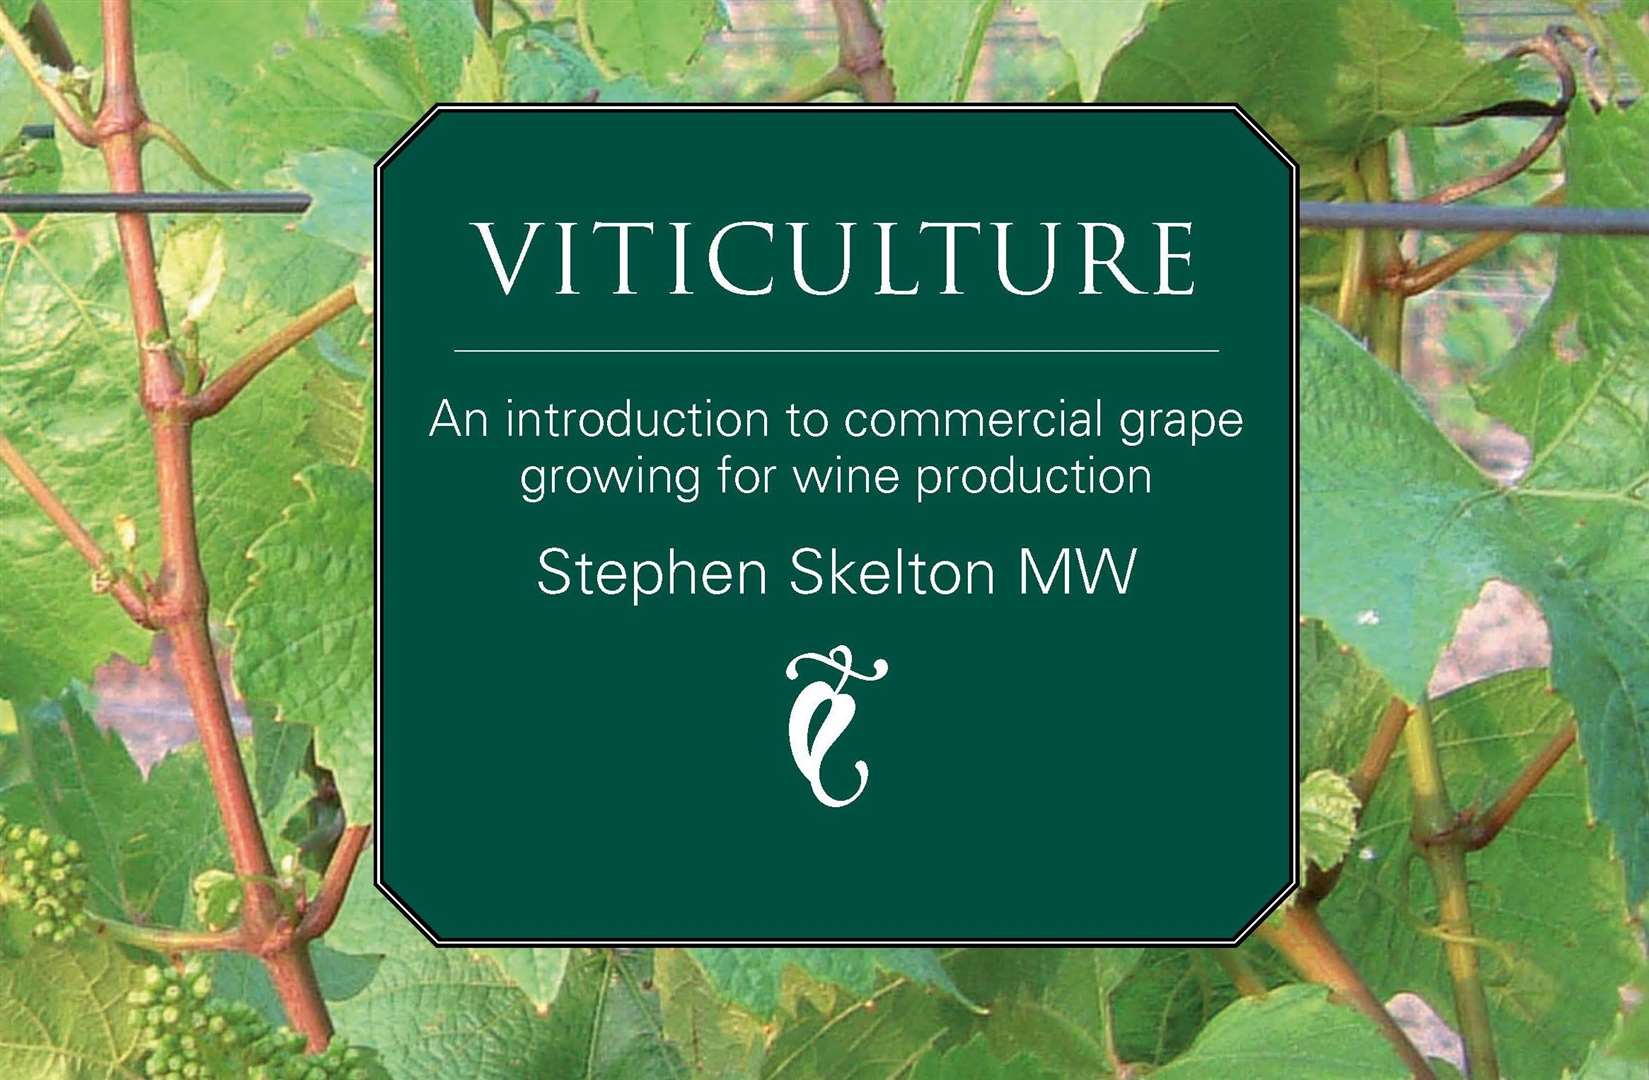 His book on Viticulture has sold thousands of copies around the world. Picture: Stephen Skelton